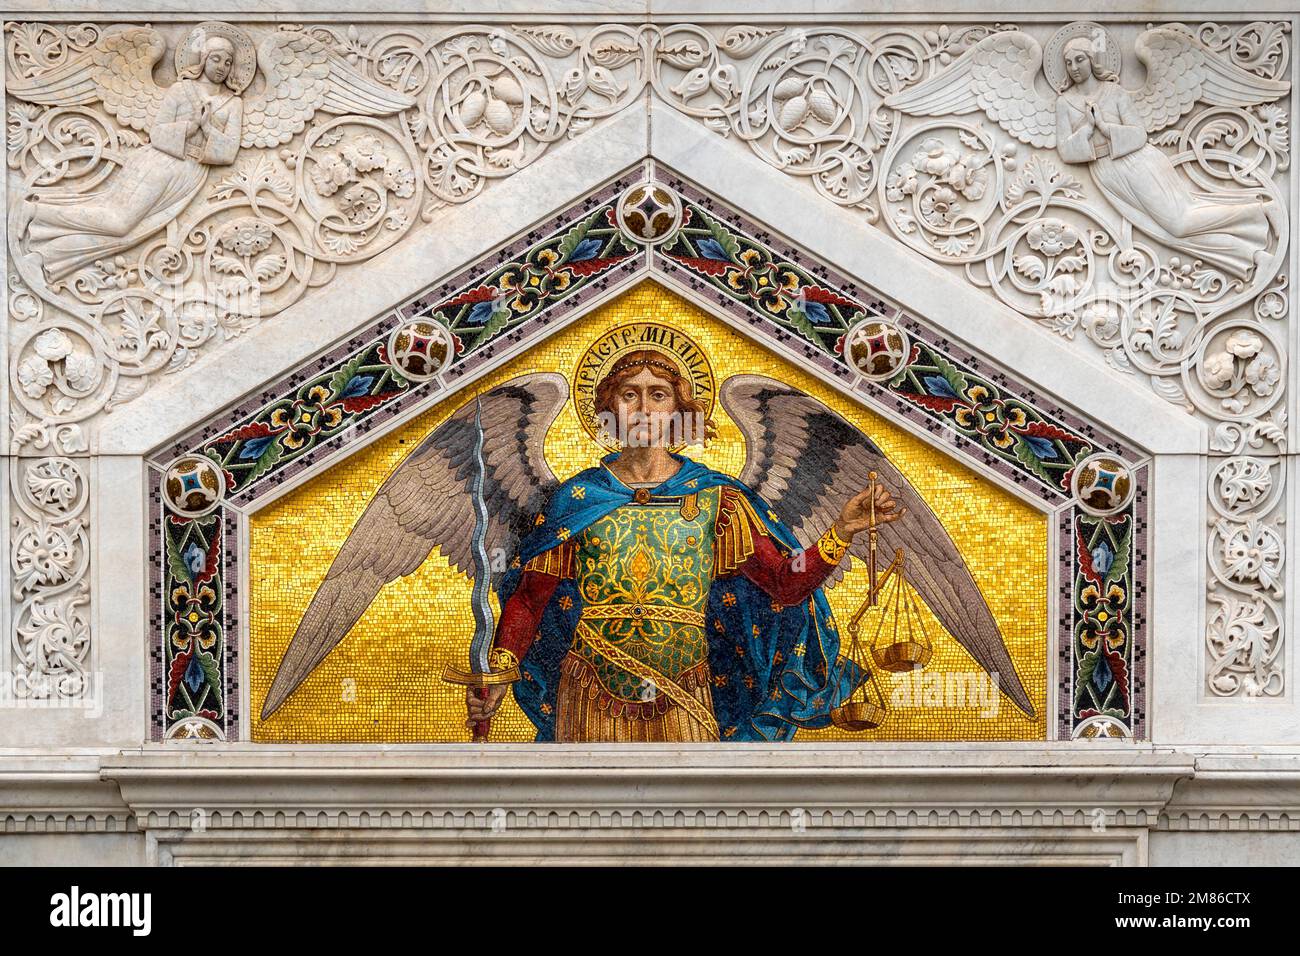 Mosaic of the Archangel Michael on the northern entrance of the Church of Saint Spyridon, Trieste, Italy Stock Photo